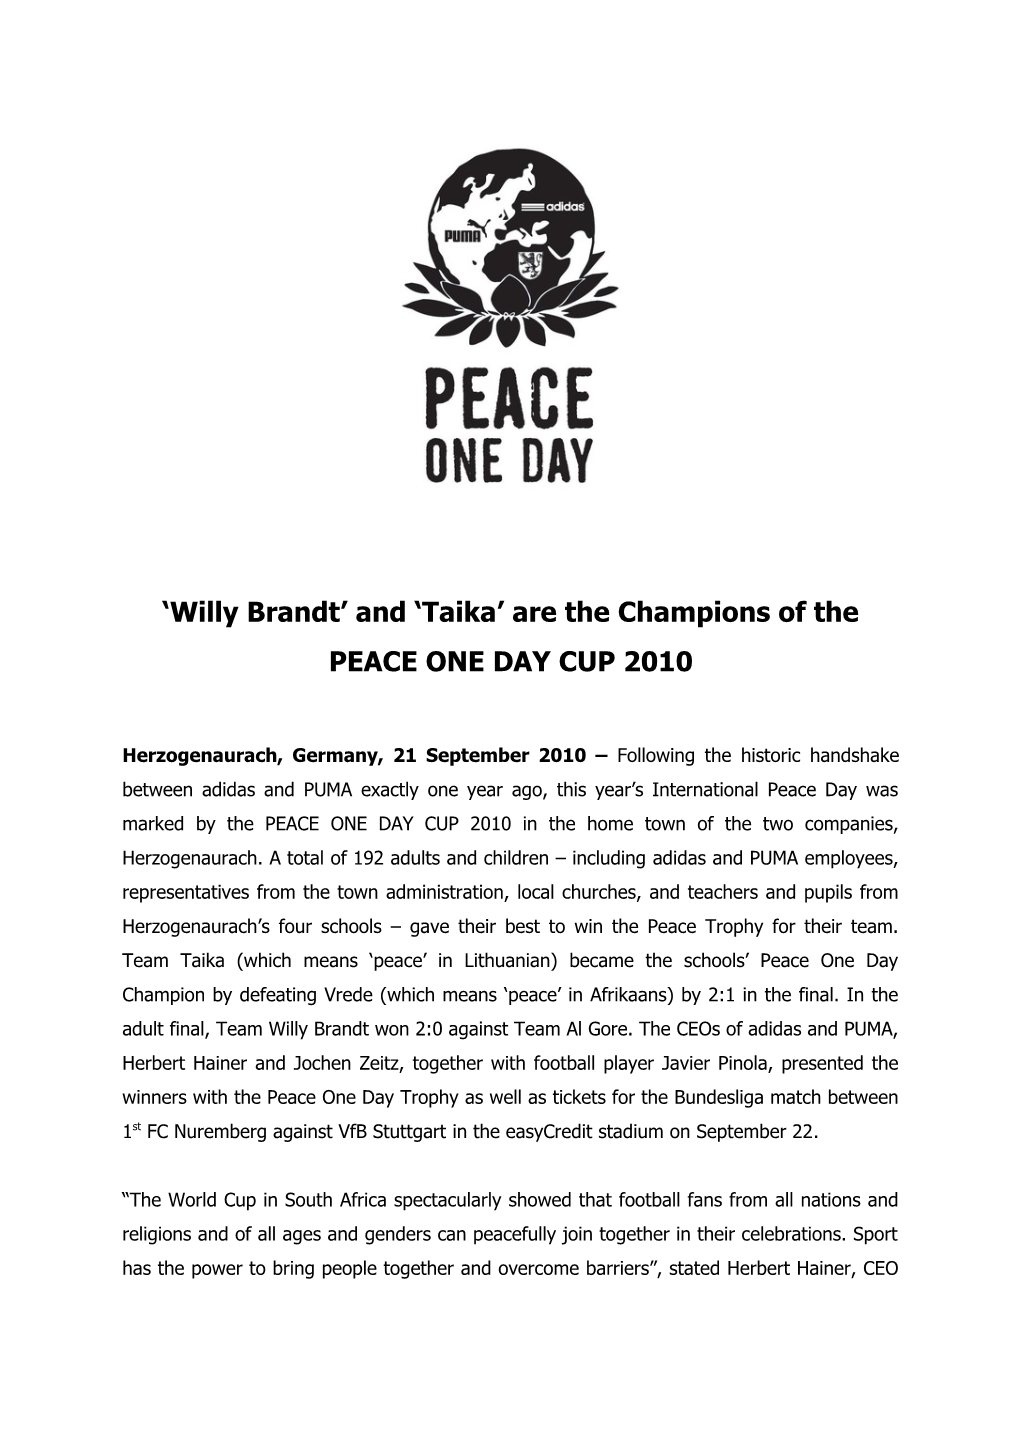 Willy Brandt and Taika Are the Champions of the PEACE ONE DAY CUP 2010